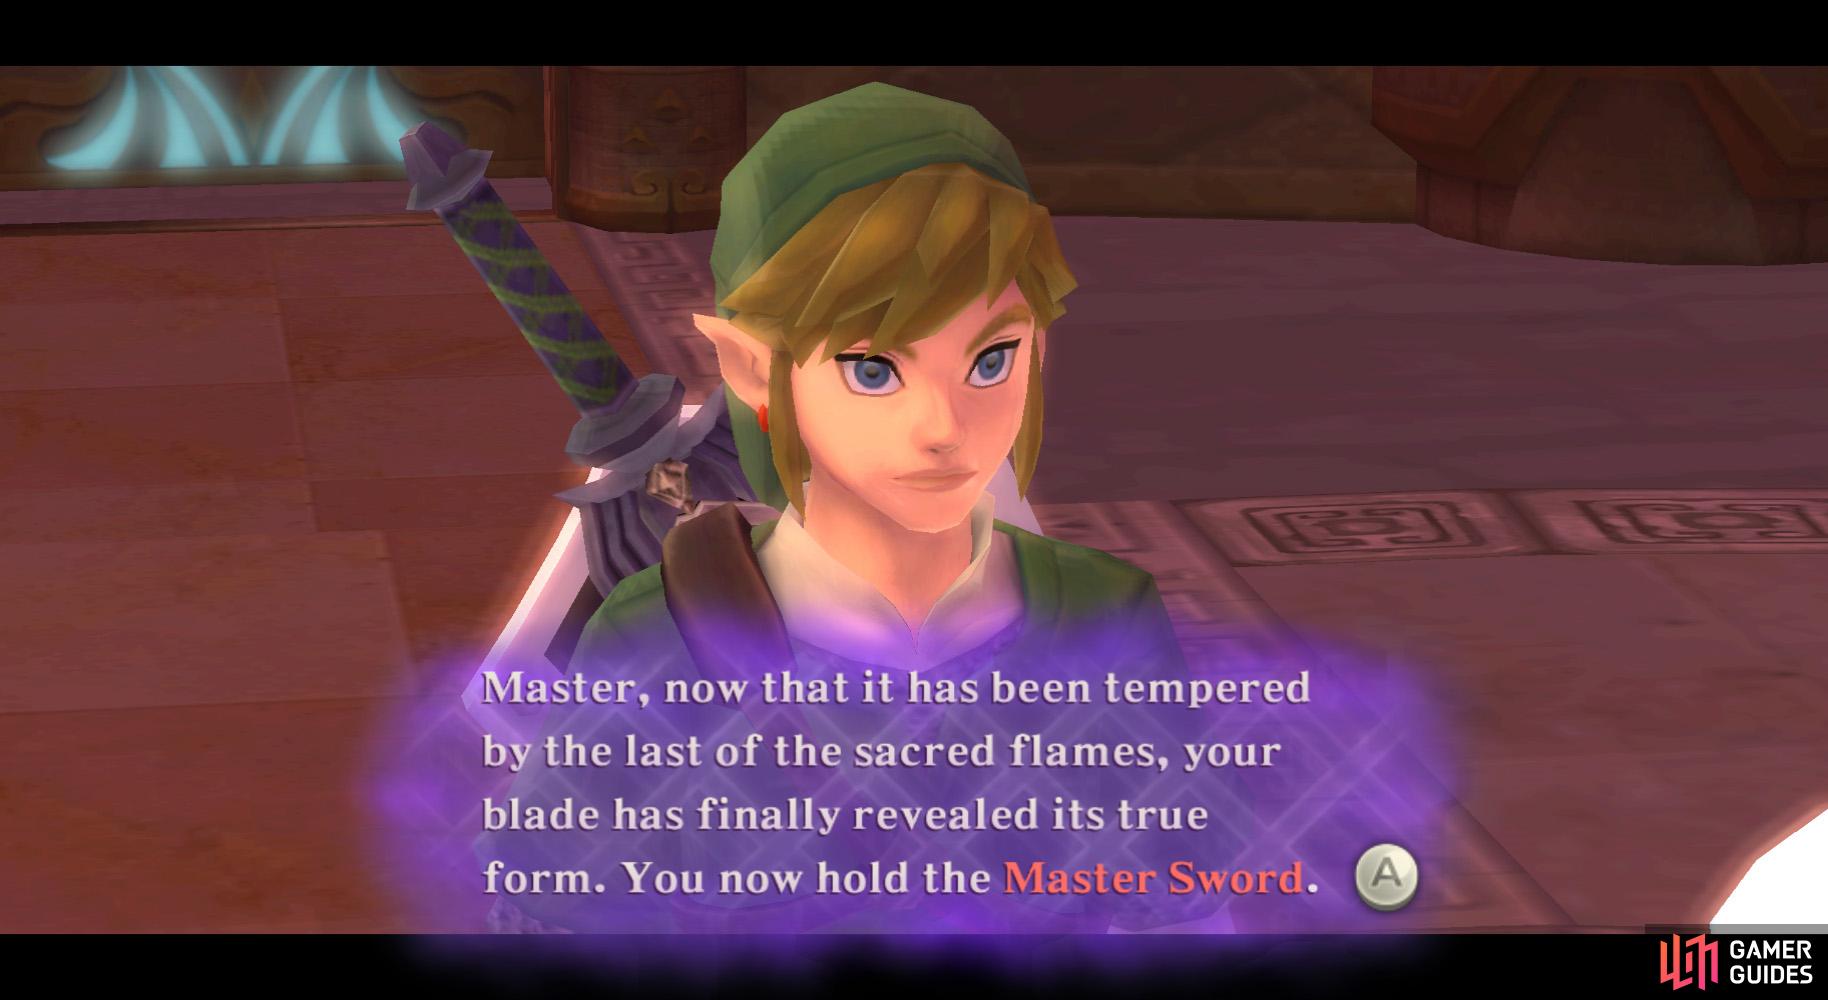 You're Fi's master… Hence, the Master Sword. Get it?